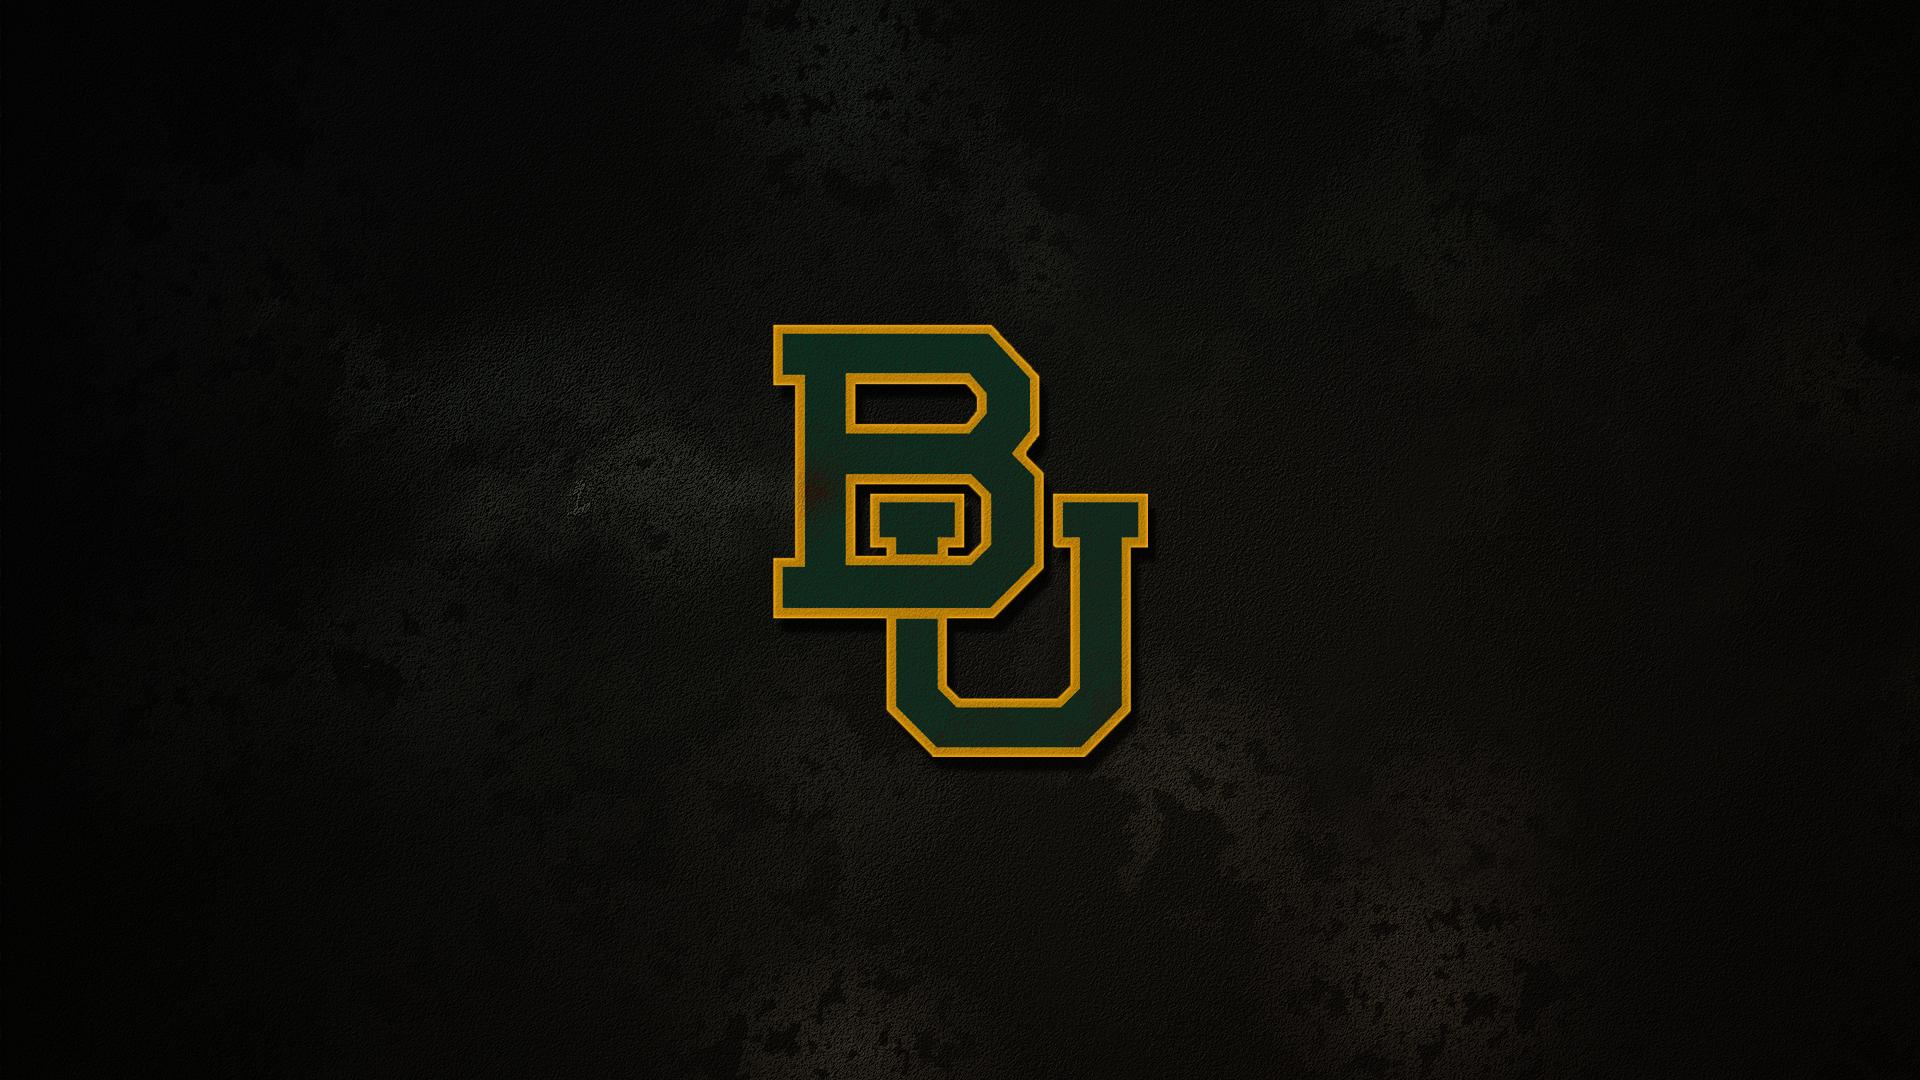 Simple But Cool Baylor Wallpaper Made By U Mizzoudude And Posted